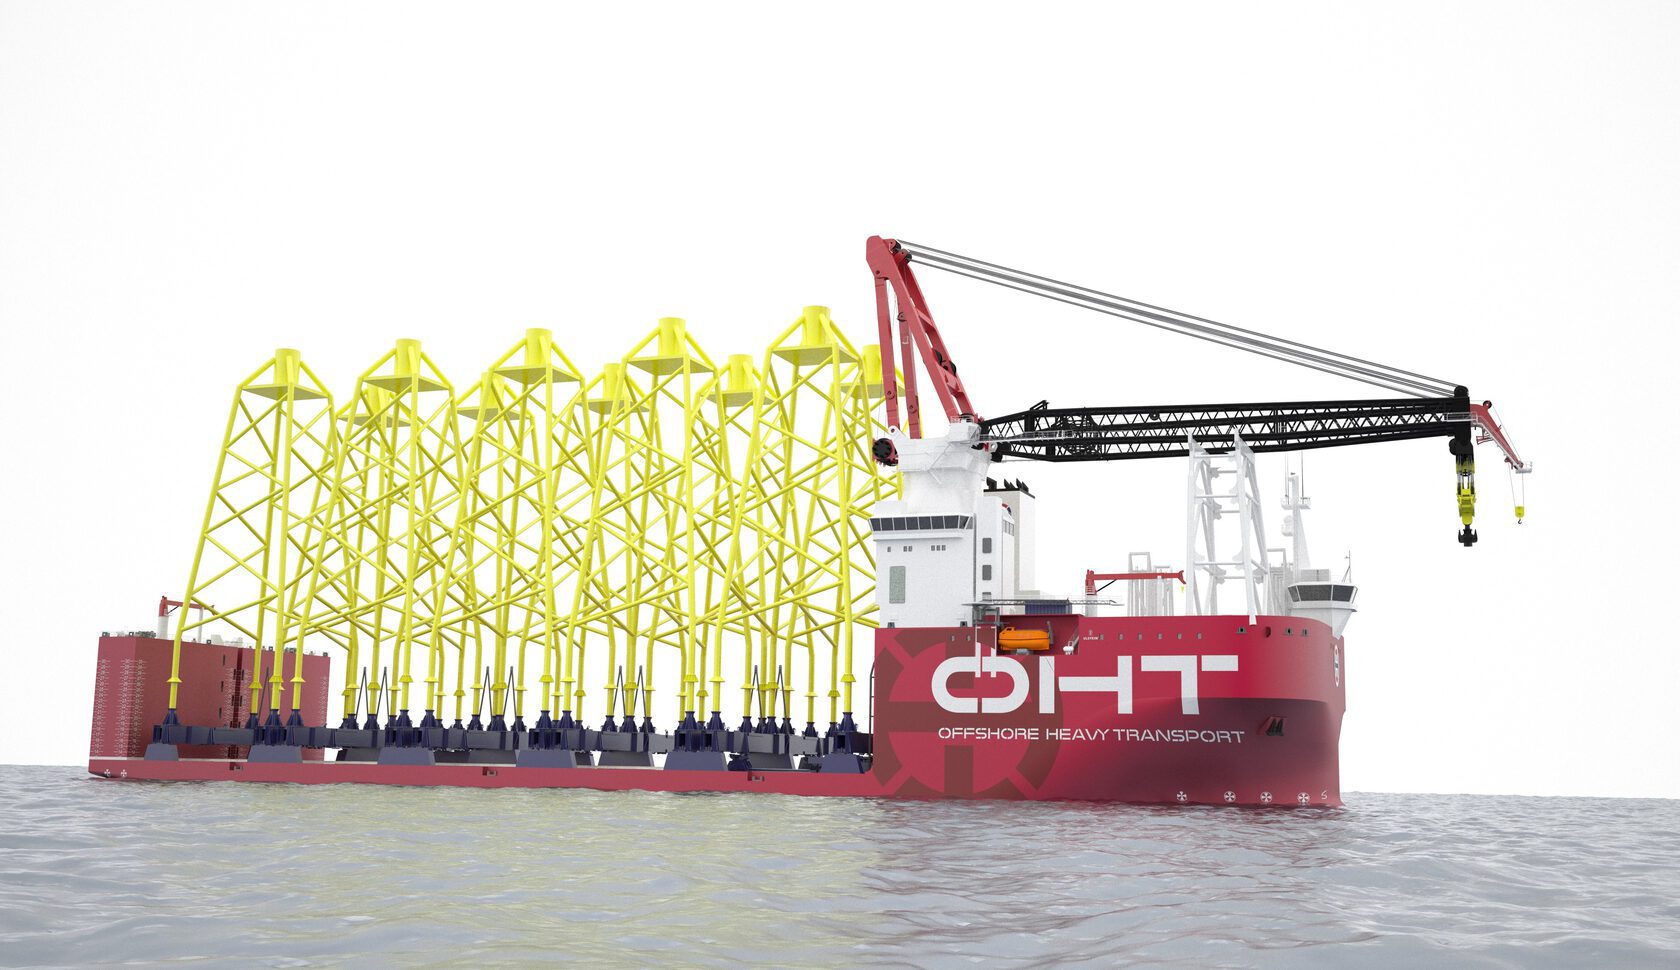 Seaway 7 Discloses Crane Problem On Newbuild Offshore Wind Heavy Lift Vessel Being Built in China